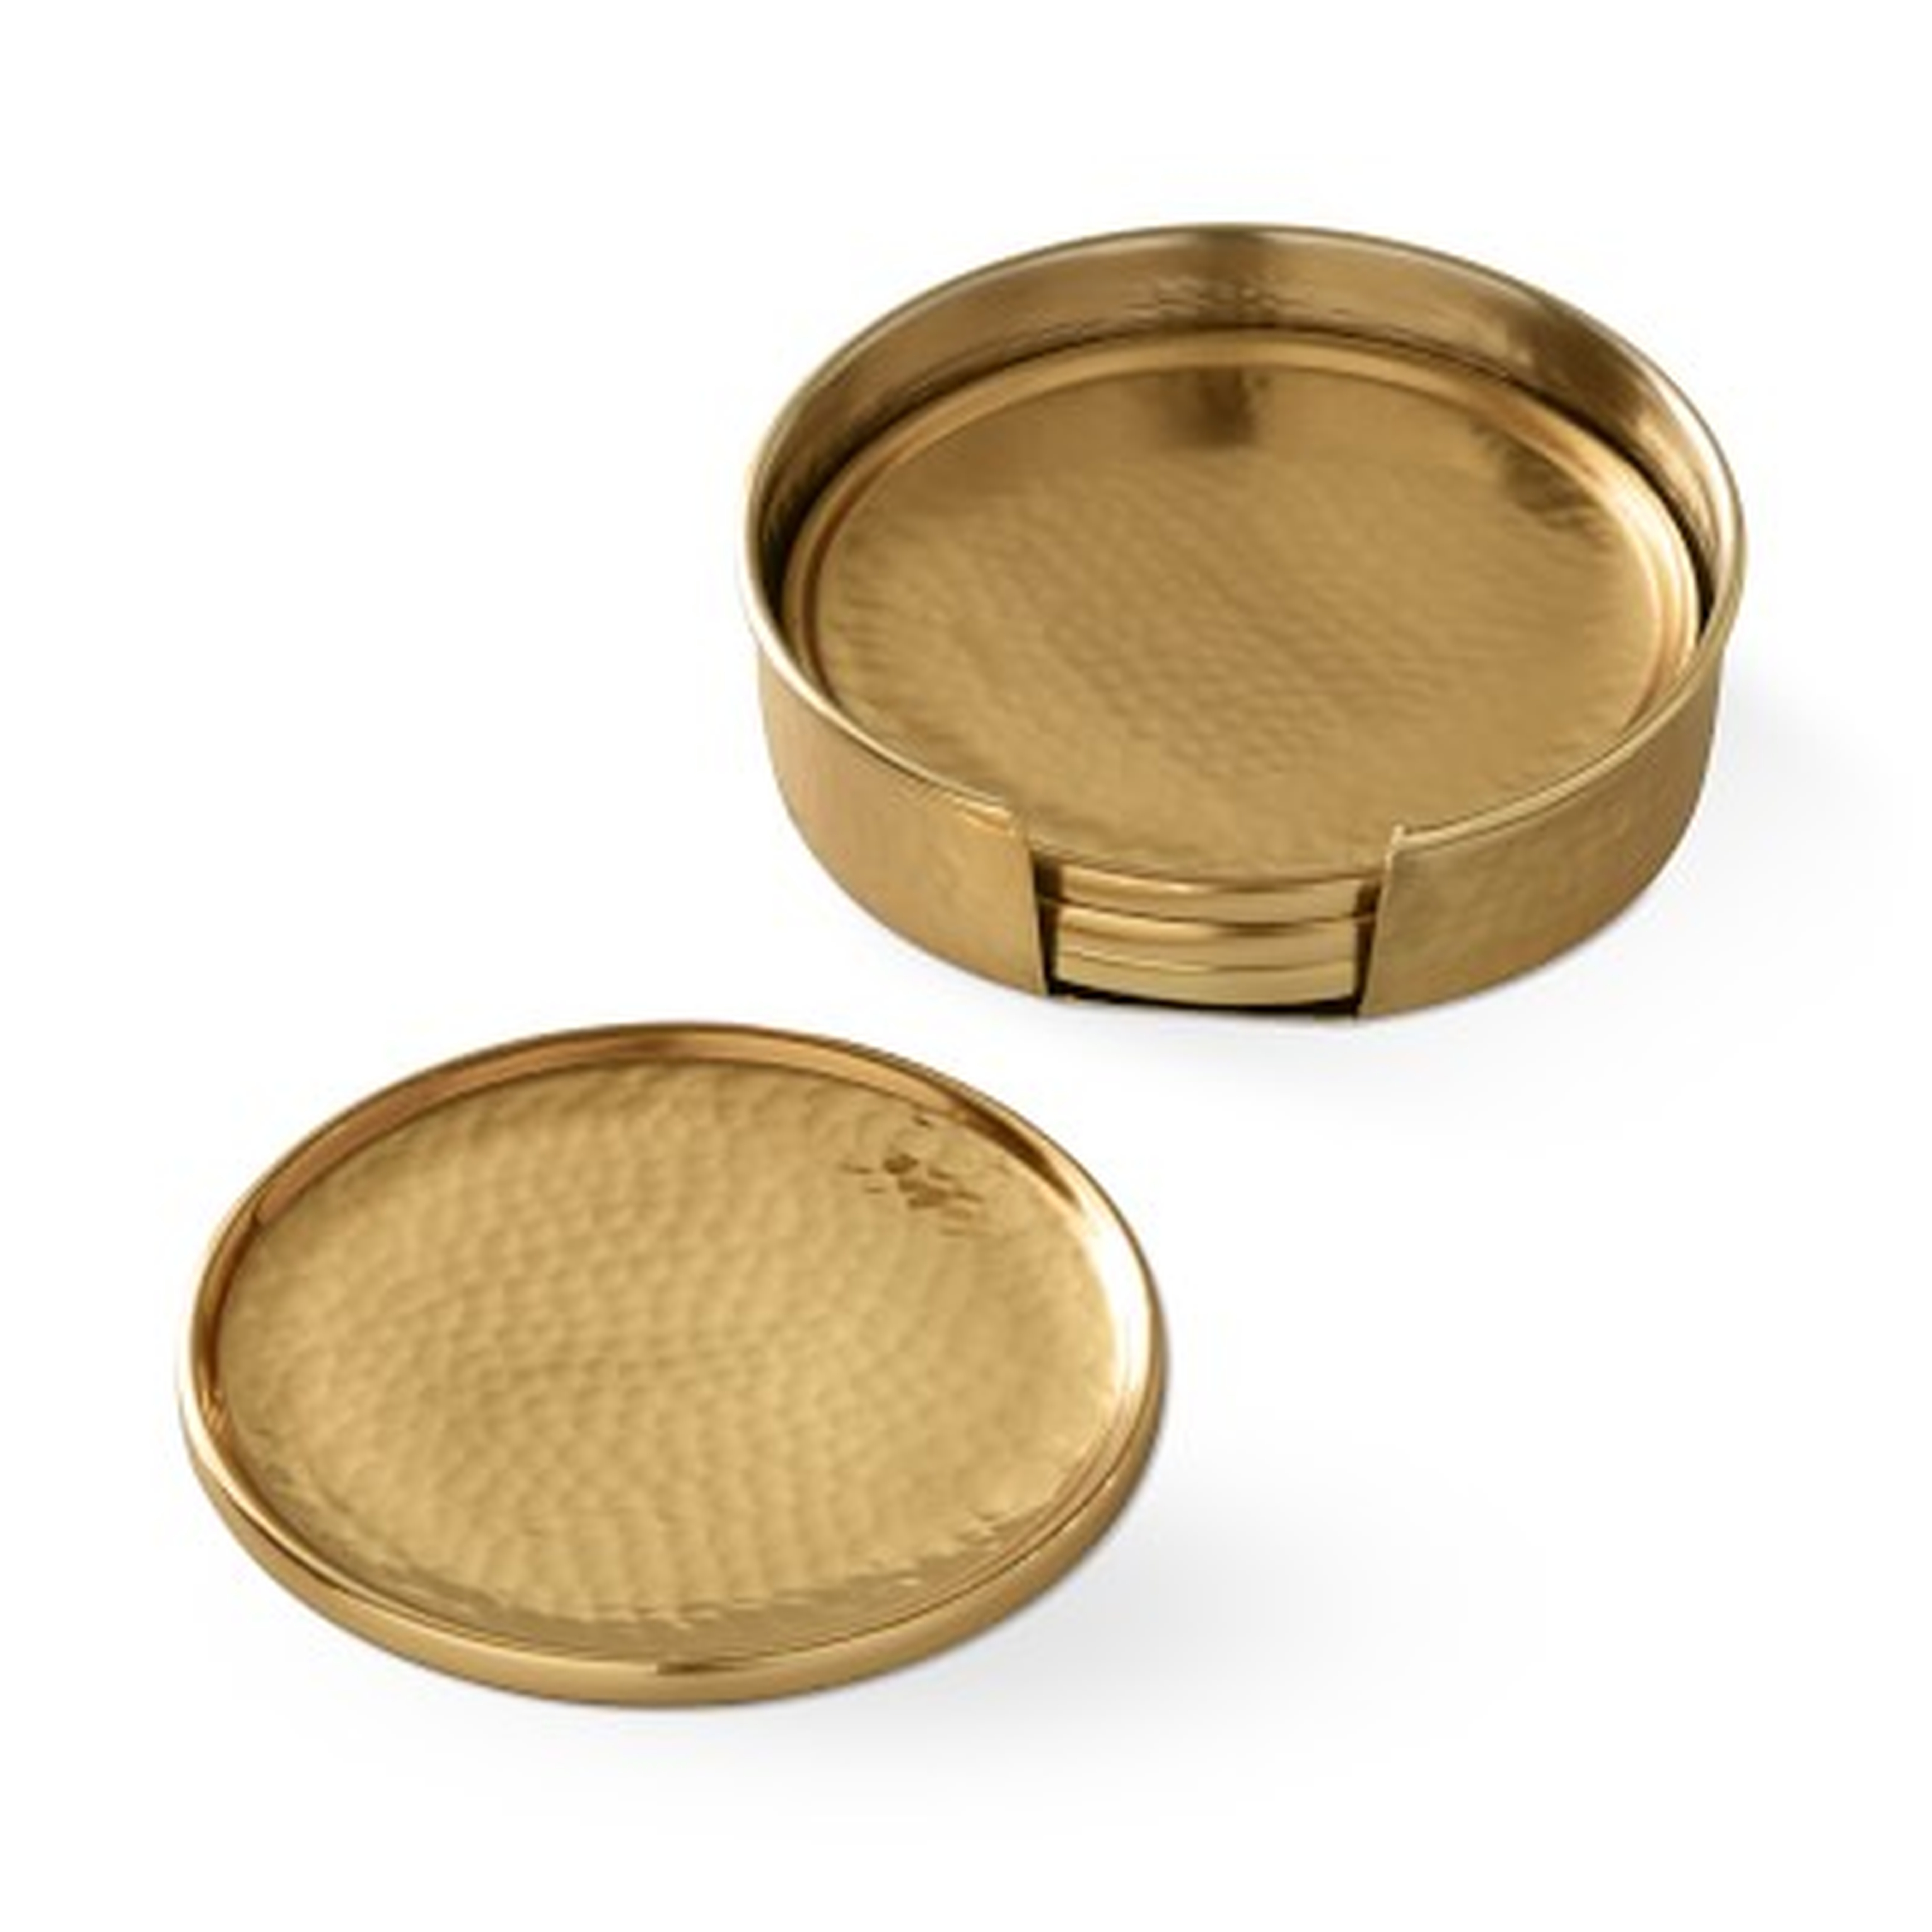 Antique Brass Hammered Coasters with Holder, Set of 4 - Williams Sonoma